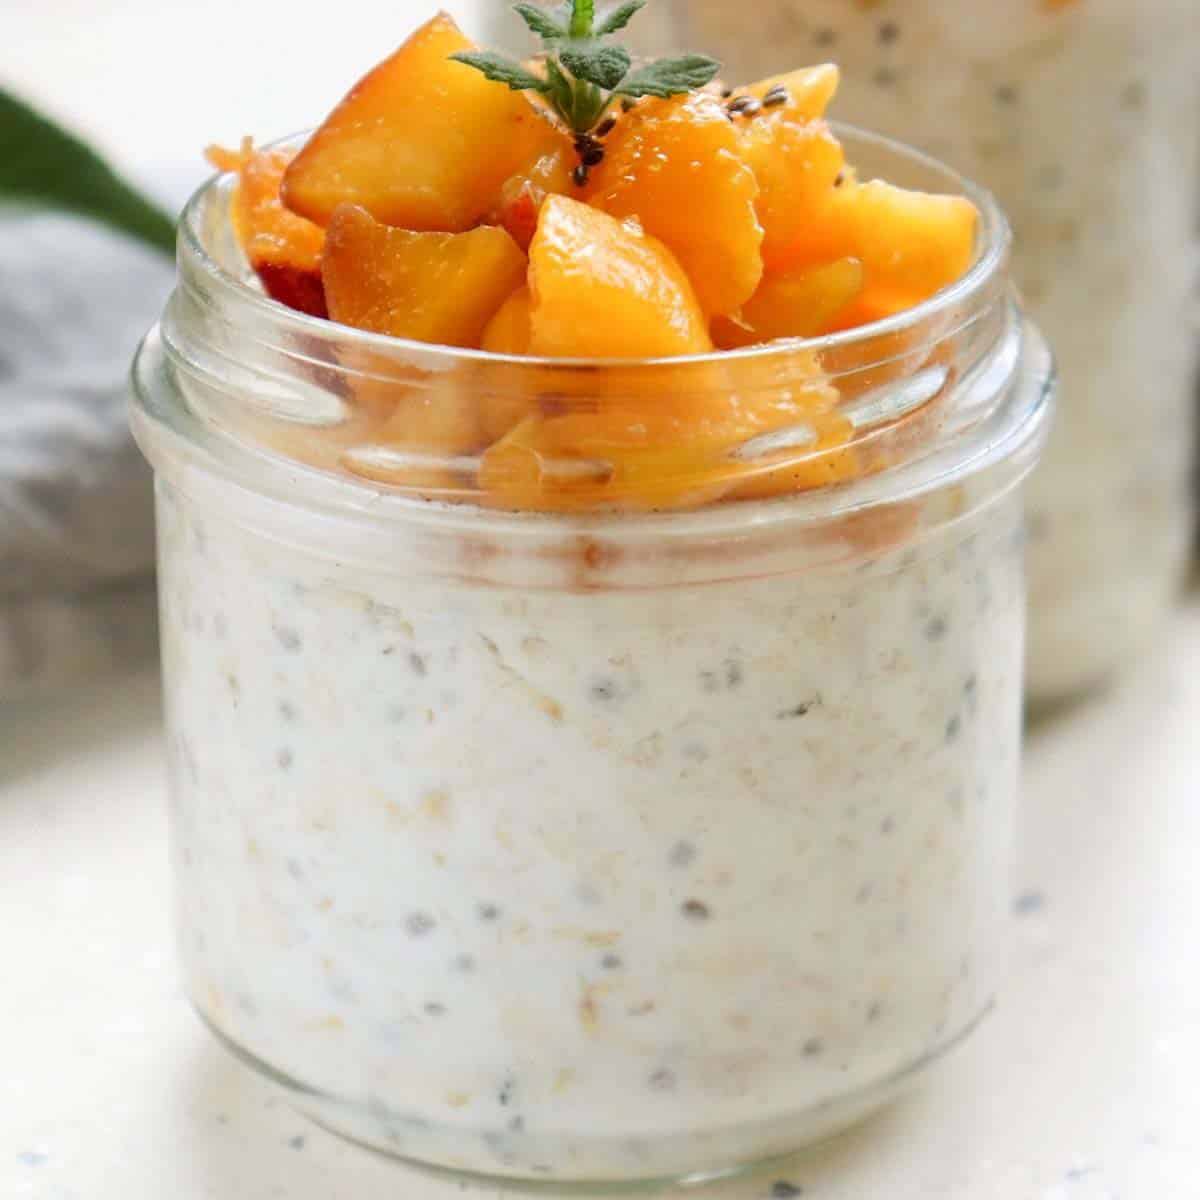 Thumbnail of low calorie peach overnight oats.